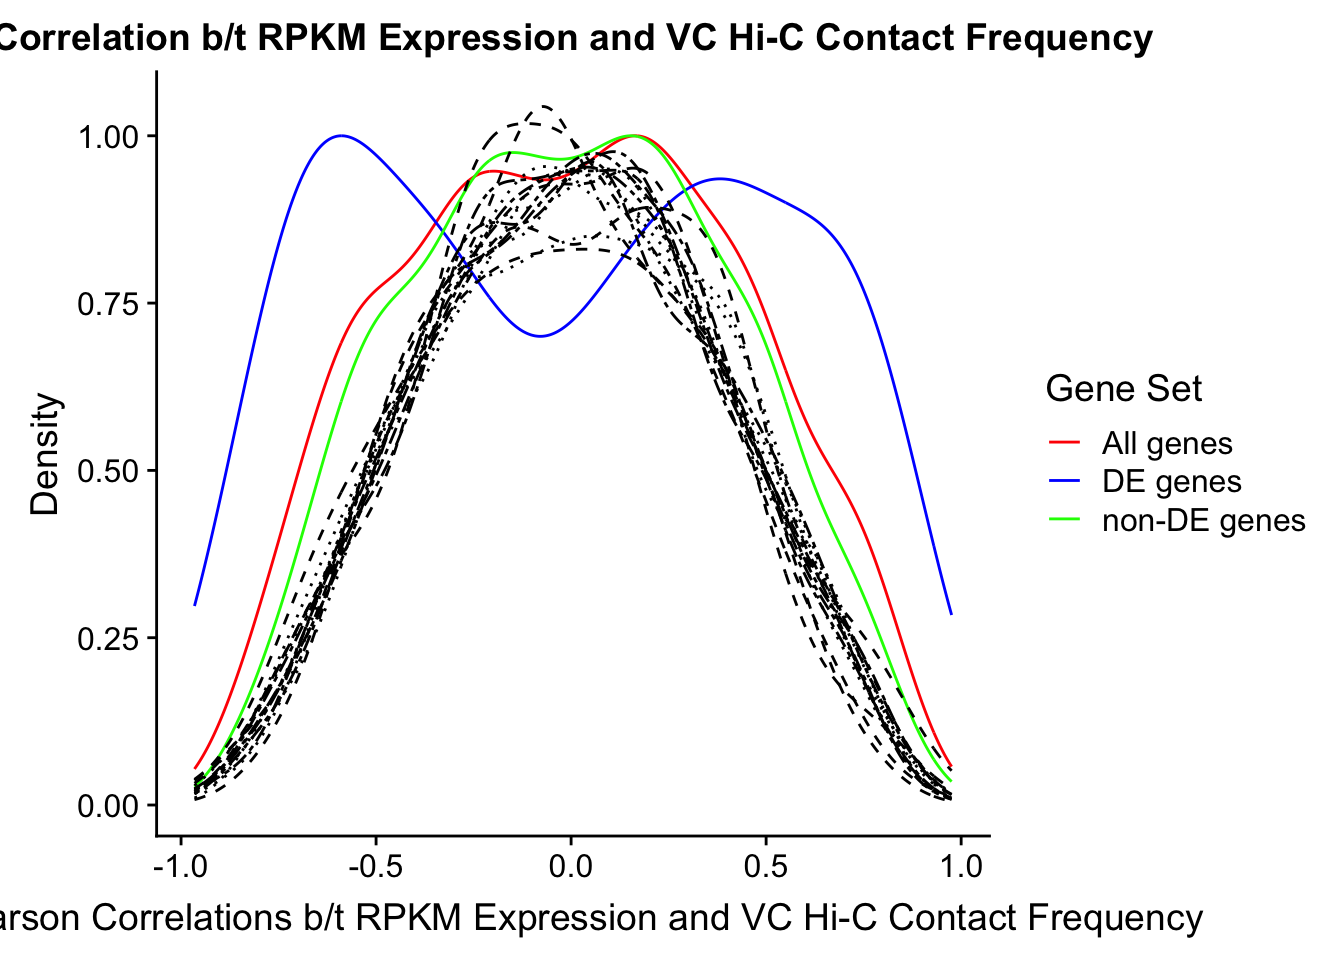 Merging Expression and Hi-C; Followed by correlation exploration-4.png